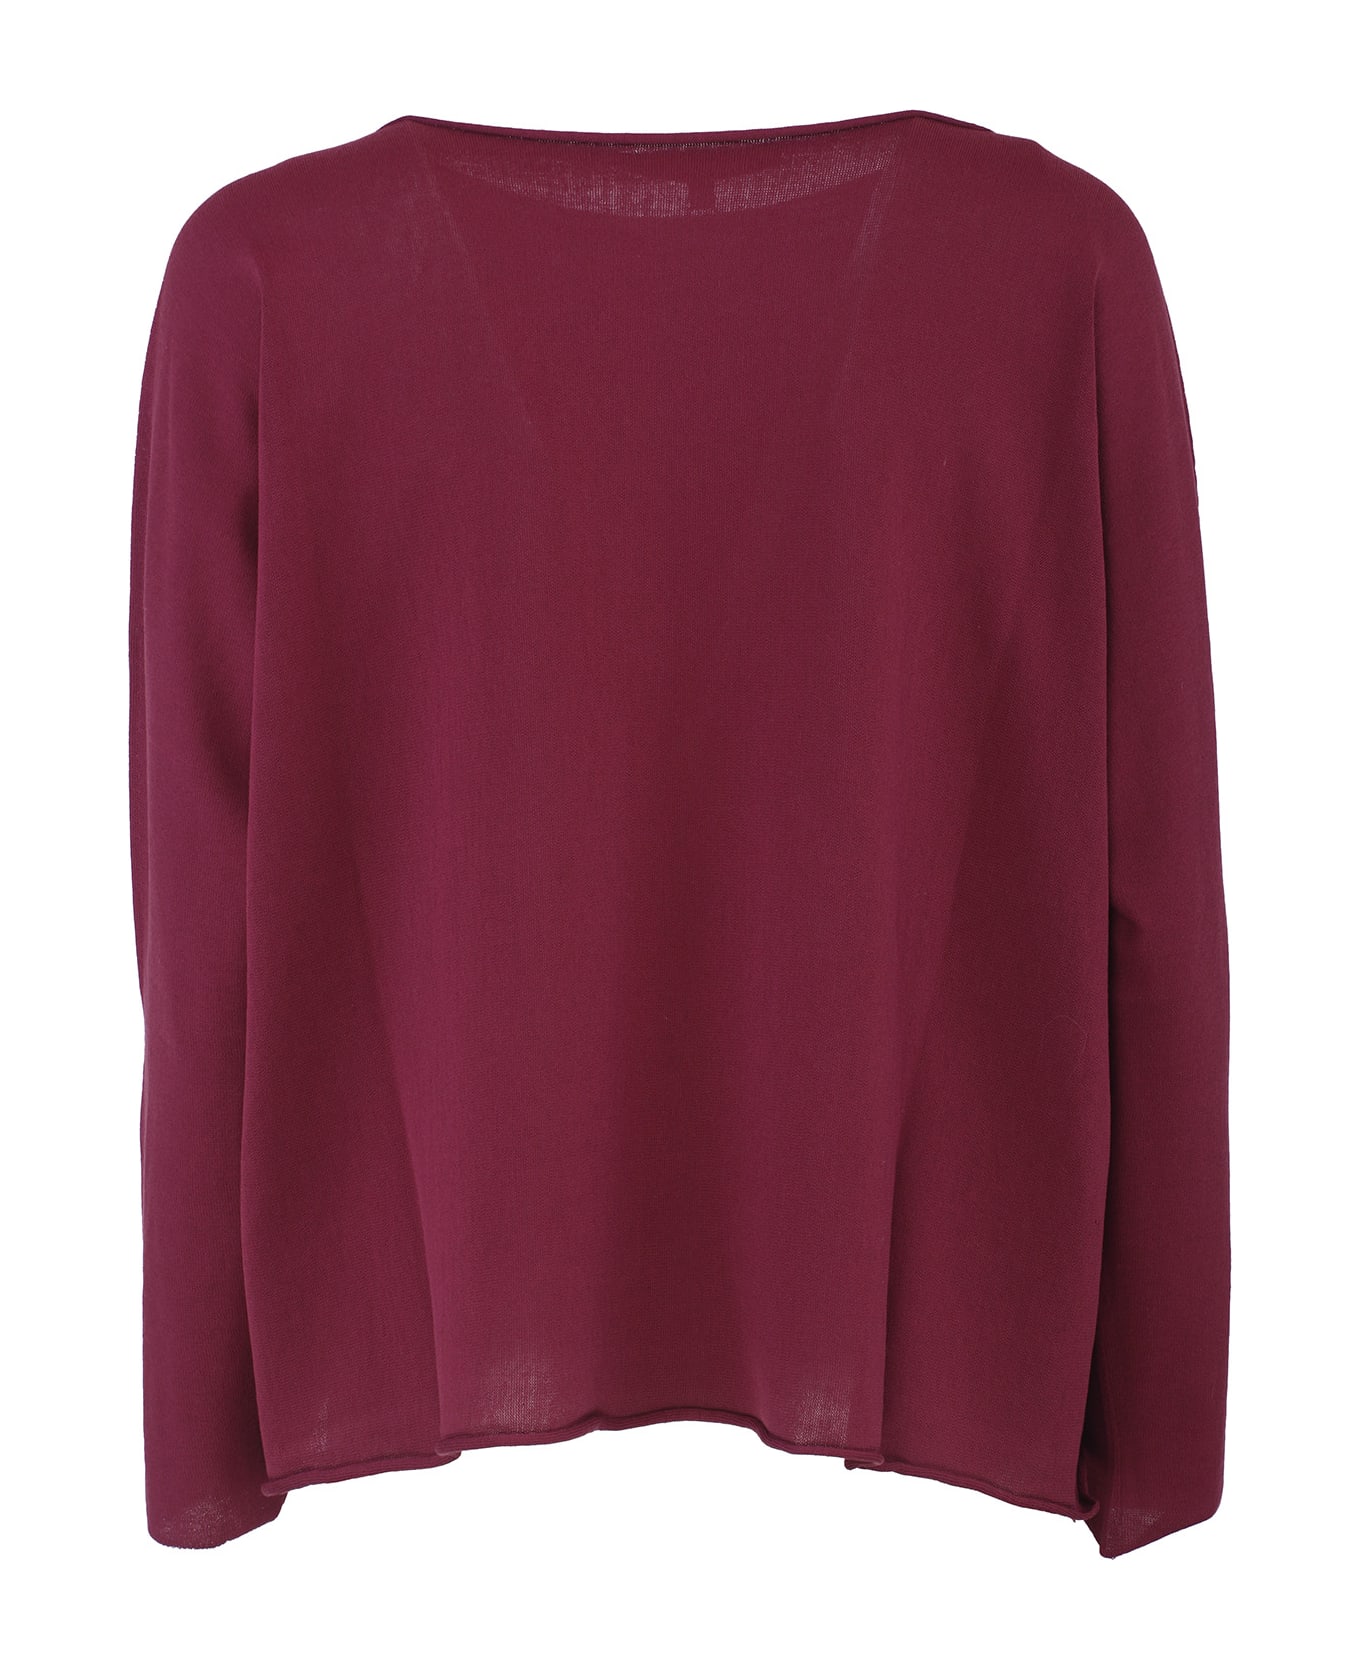 Antonelli Firenze Sweaters Red - Red ニットウェア